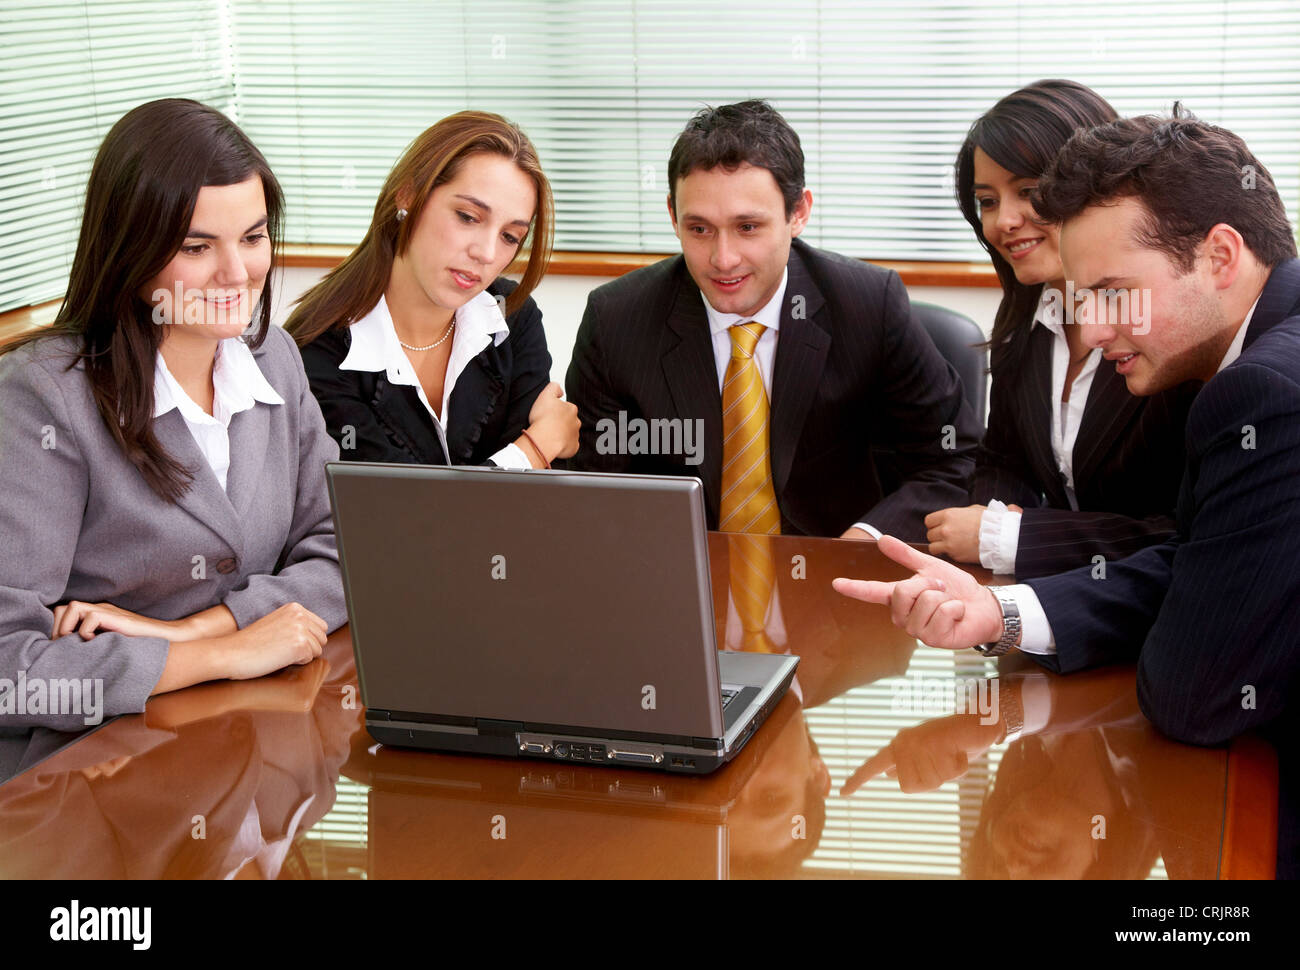 businessmen and businesswomen in a business meeting in an office smiling Stock Photo